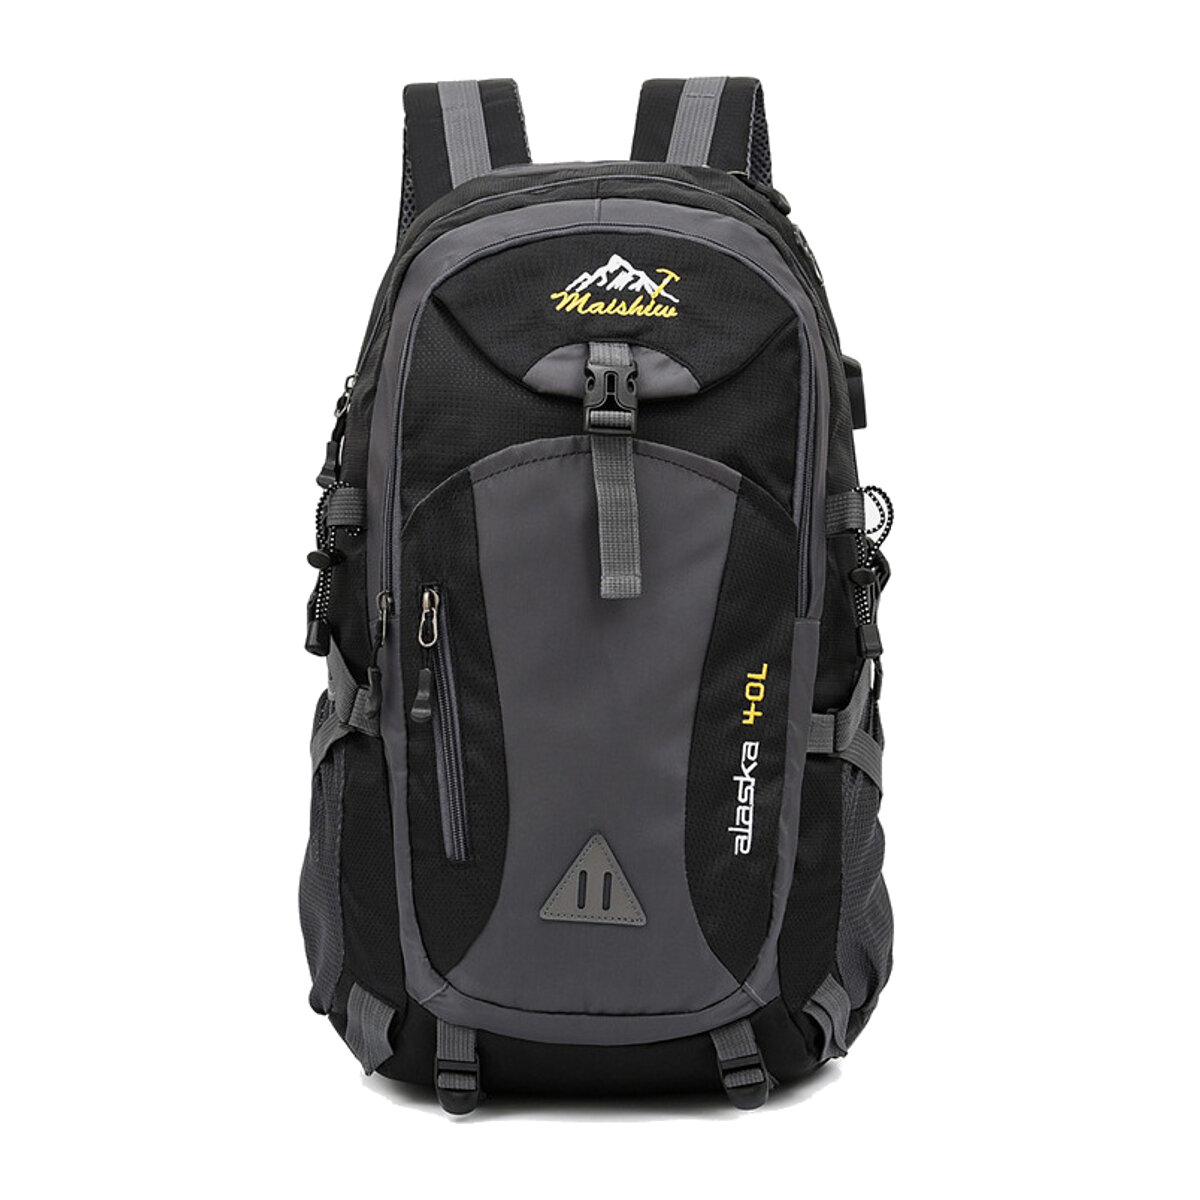 Backpack Outdoor Mountaineering Bag Laptop Bag Travel Shoulders Storage Bag with USB for 16inch Note